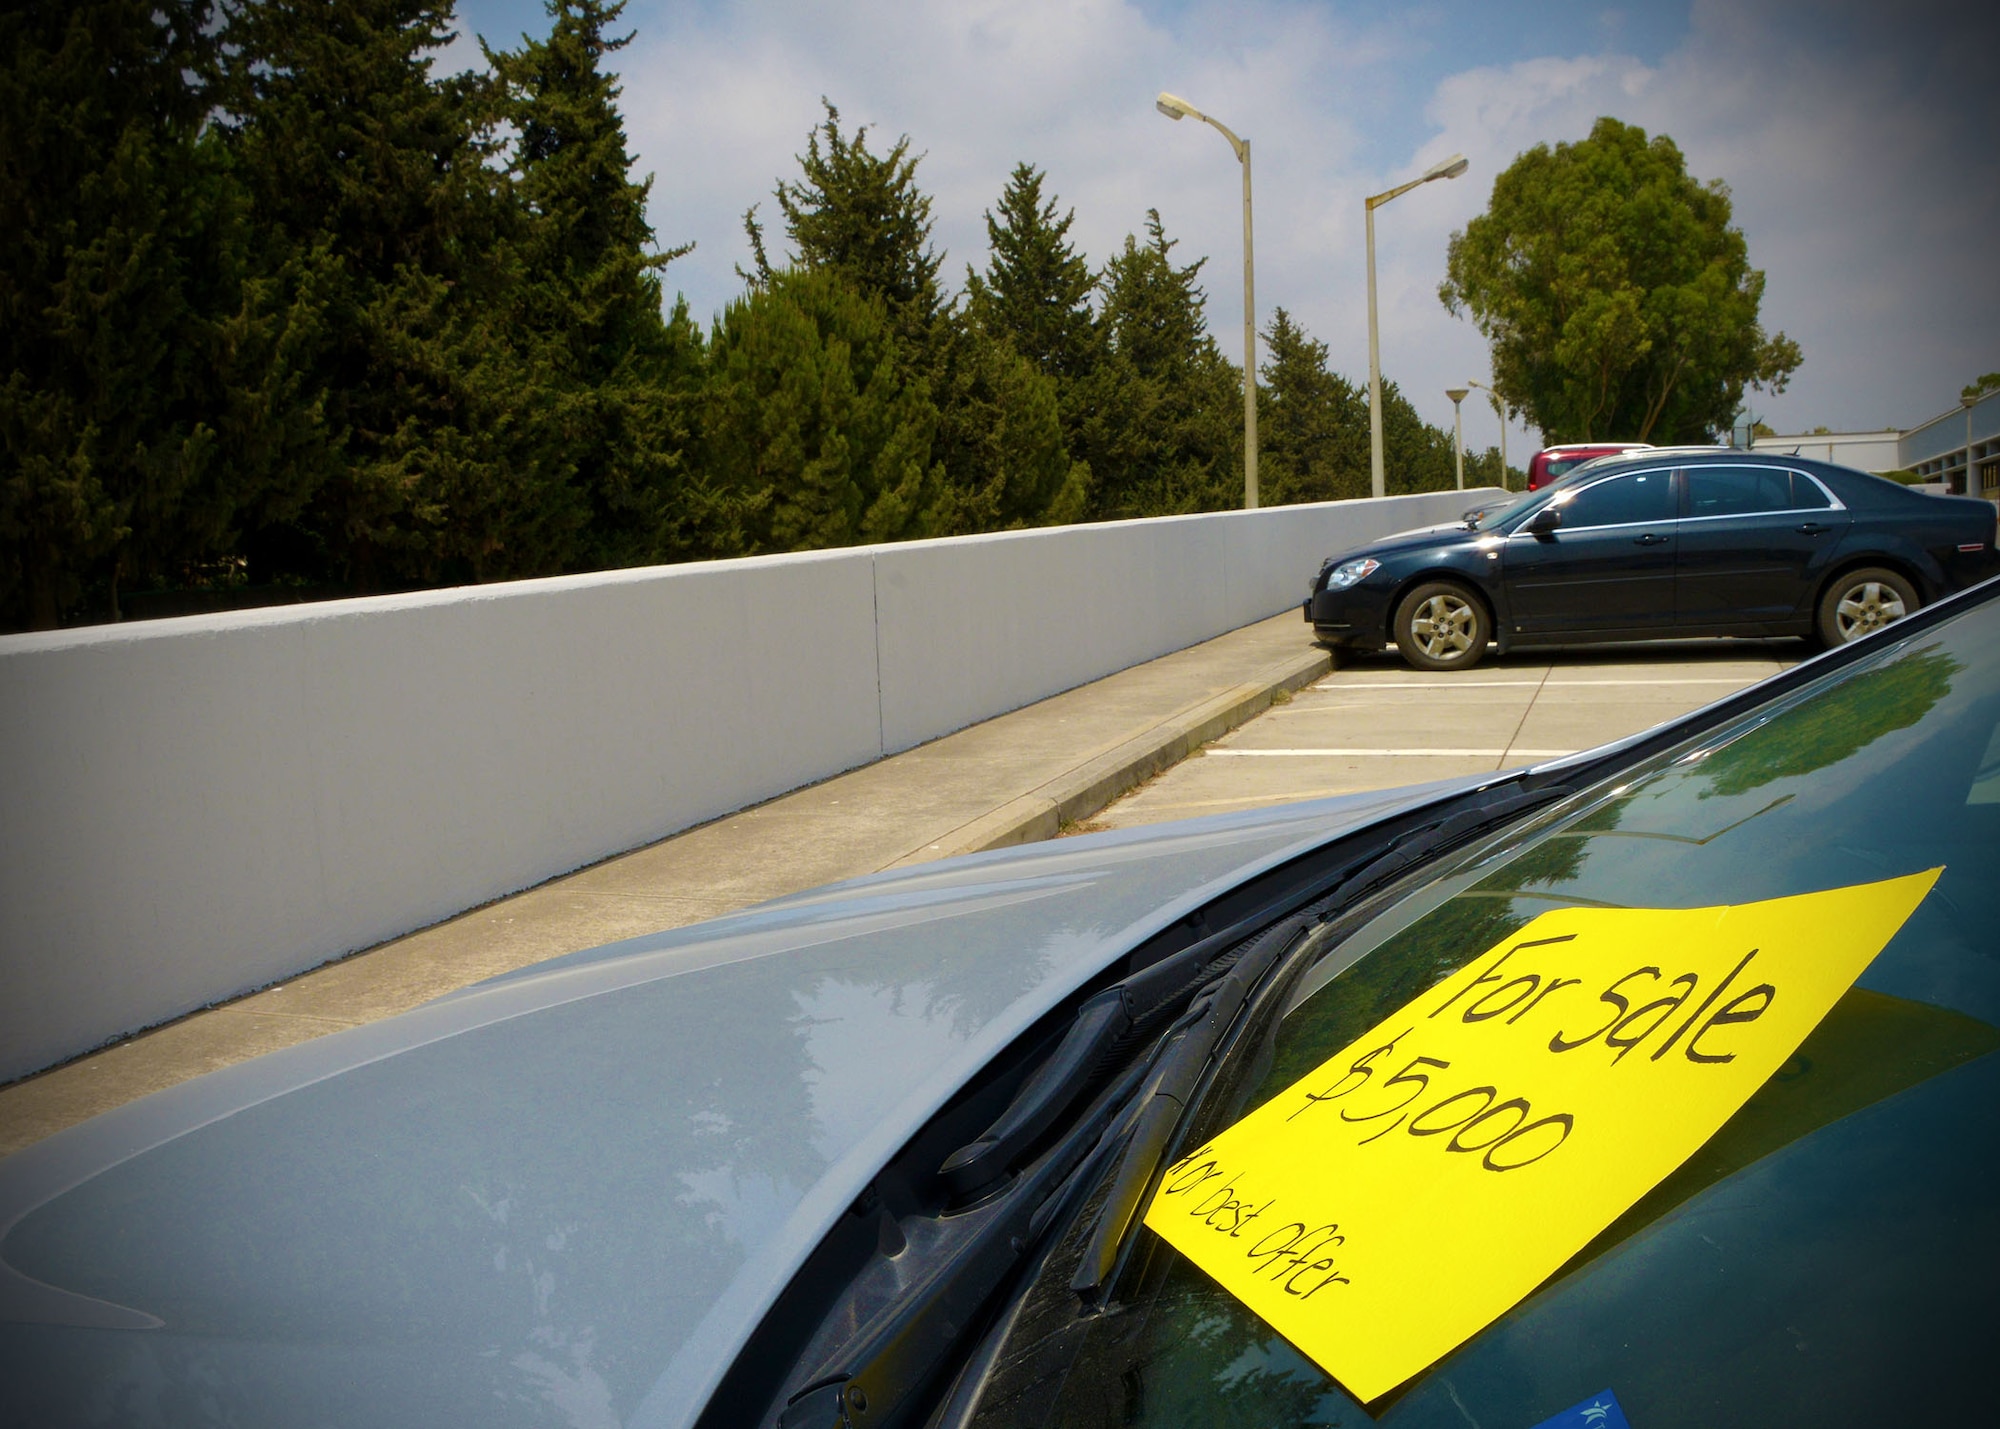 A vehicle sits in a parking lot with a ‘for sale’ sign on the windshield July 11, 2014, Incirlik Air Base, Turkey. Transferring a Privately Owned Vehicle from one U.S. member to another is a process that requires special documentation with command approval and coordination through the Turkish Customs Liaison Office. (U.S. Air Force photo by Staff Sgt. Veronica Pierce) 